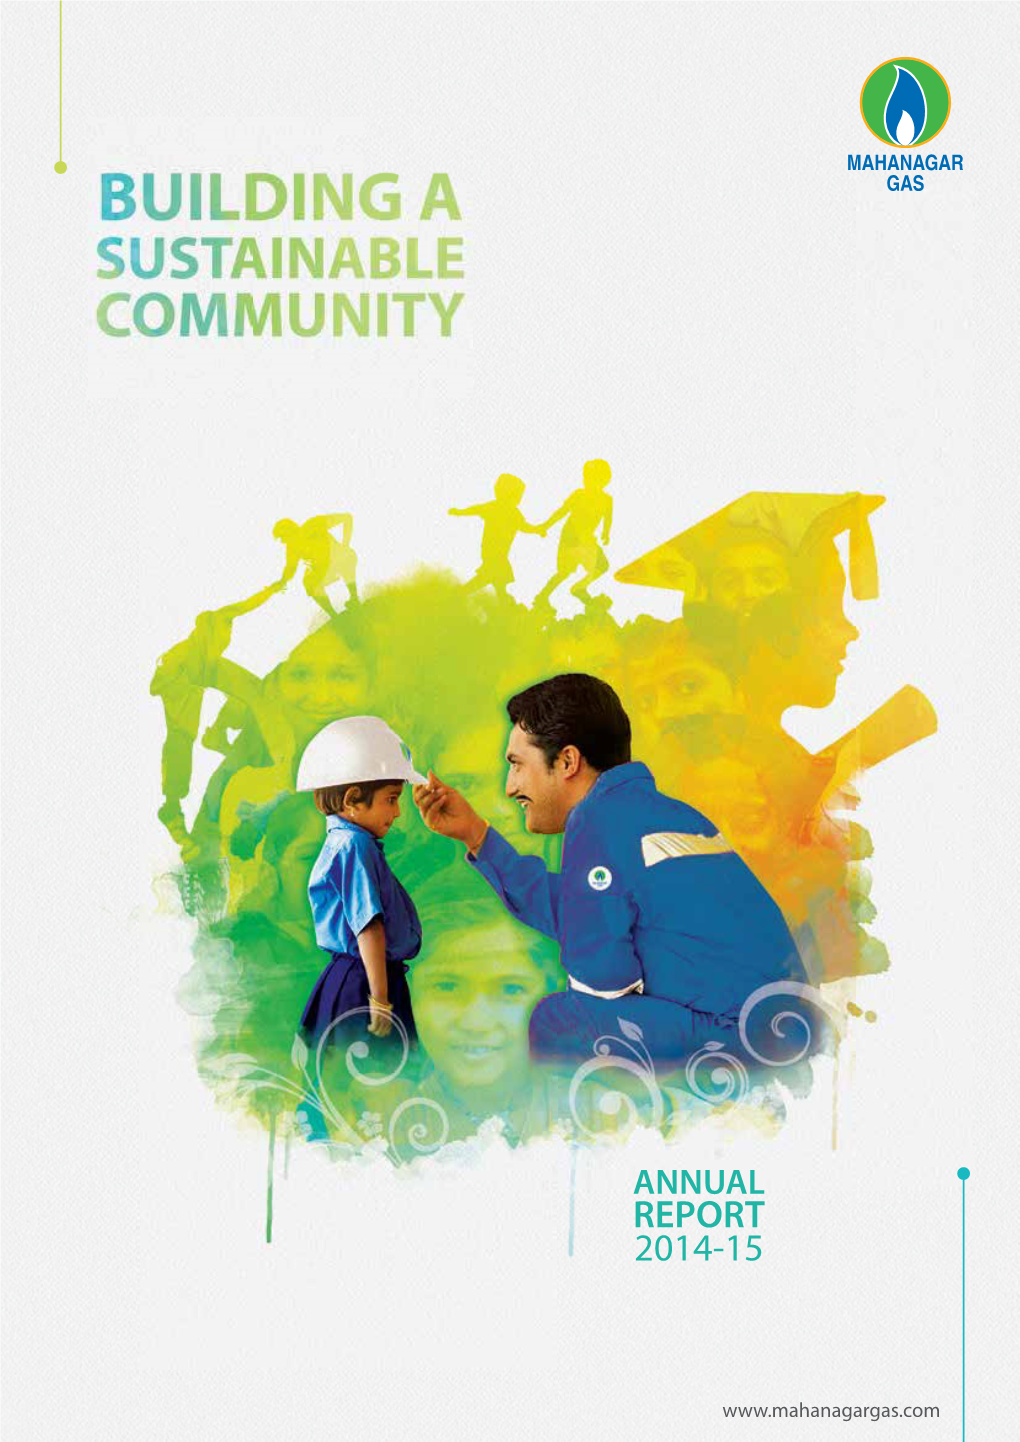 Annual Report 2014-15 Download